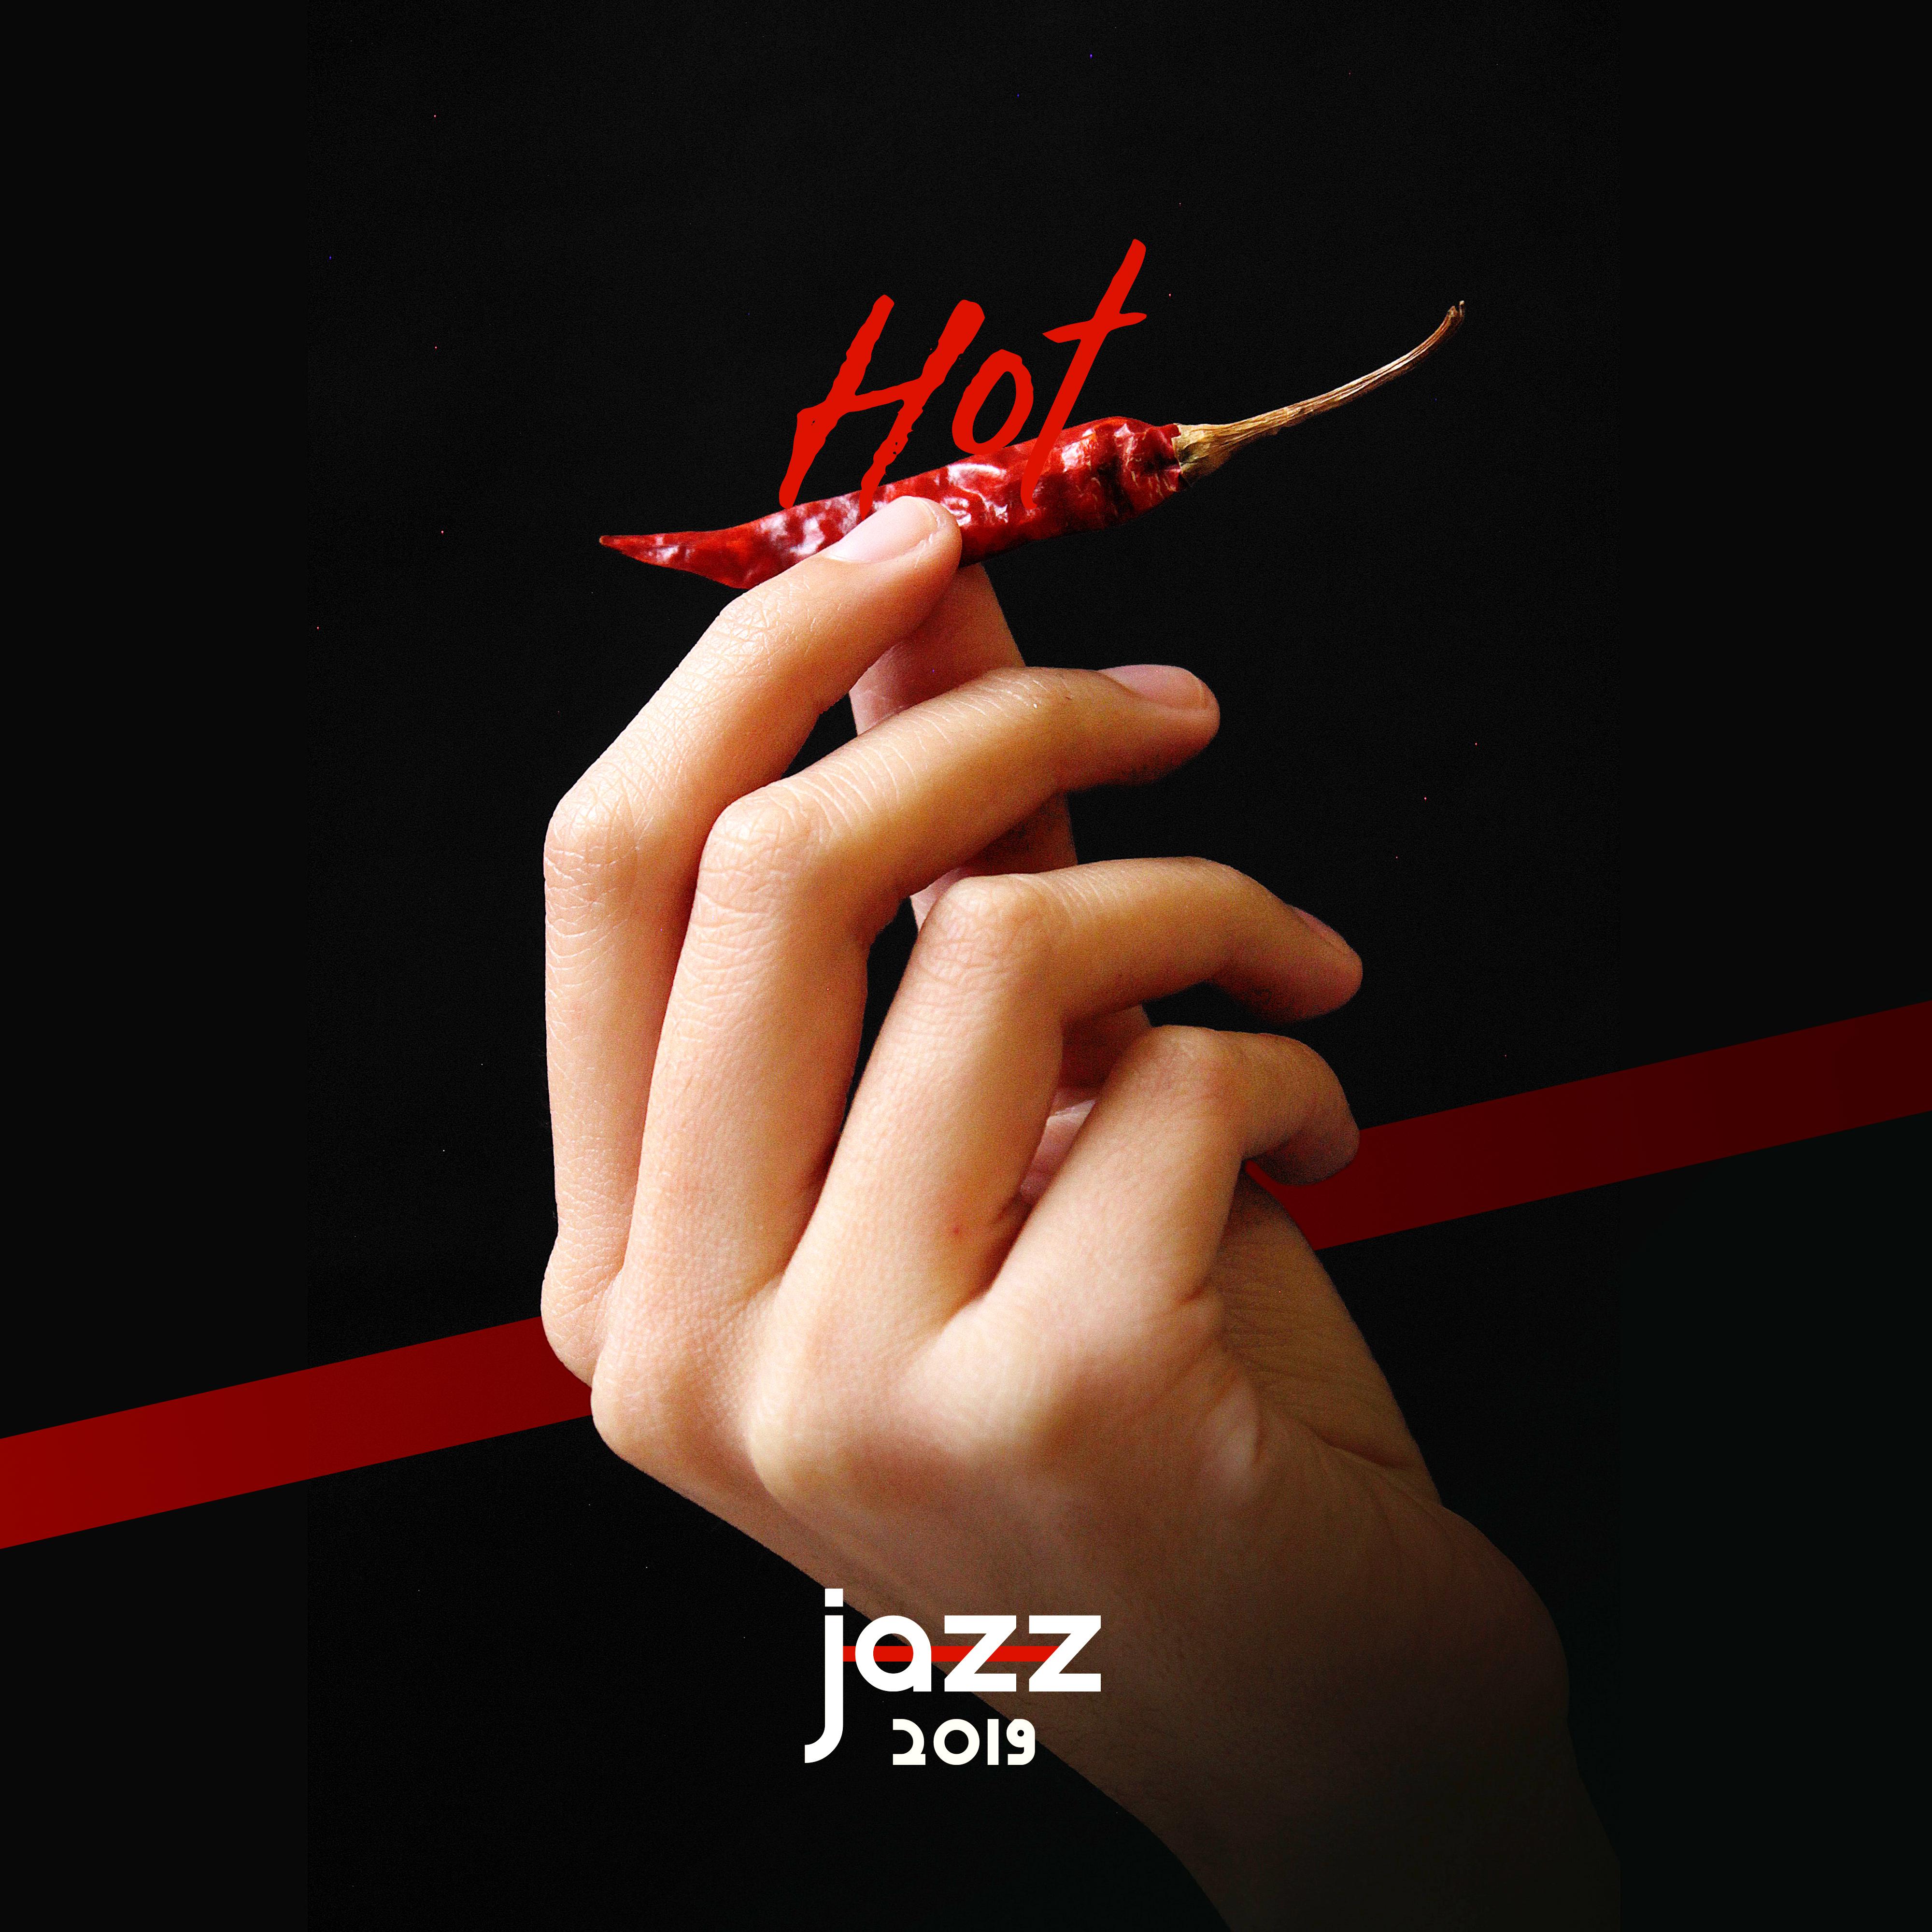 Hot Jazz 2019  Best Sensual Jazz Music at Night, Smooth Jazz for Lovers, Making Love, Sexy Jazz for Relaxation